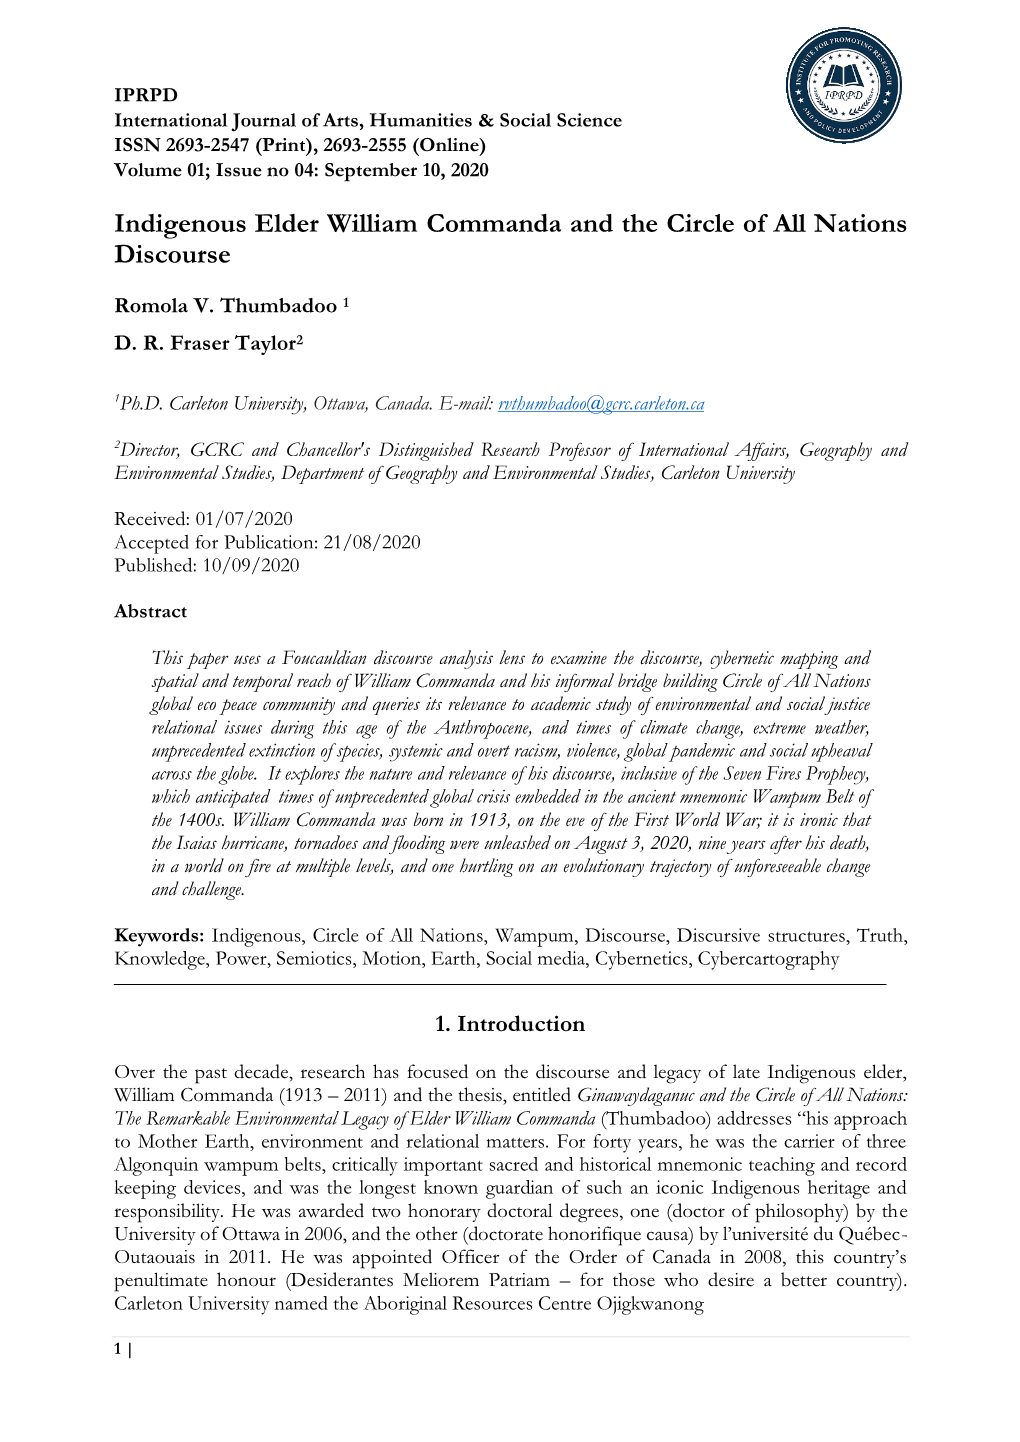 Indigenous Elder William Commanda and the Circle of All Nations Discourse